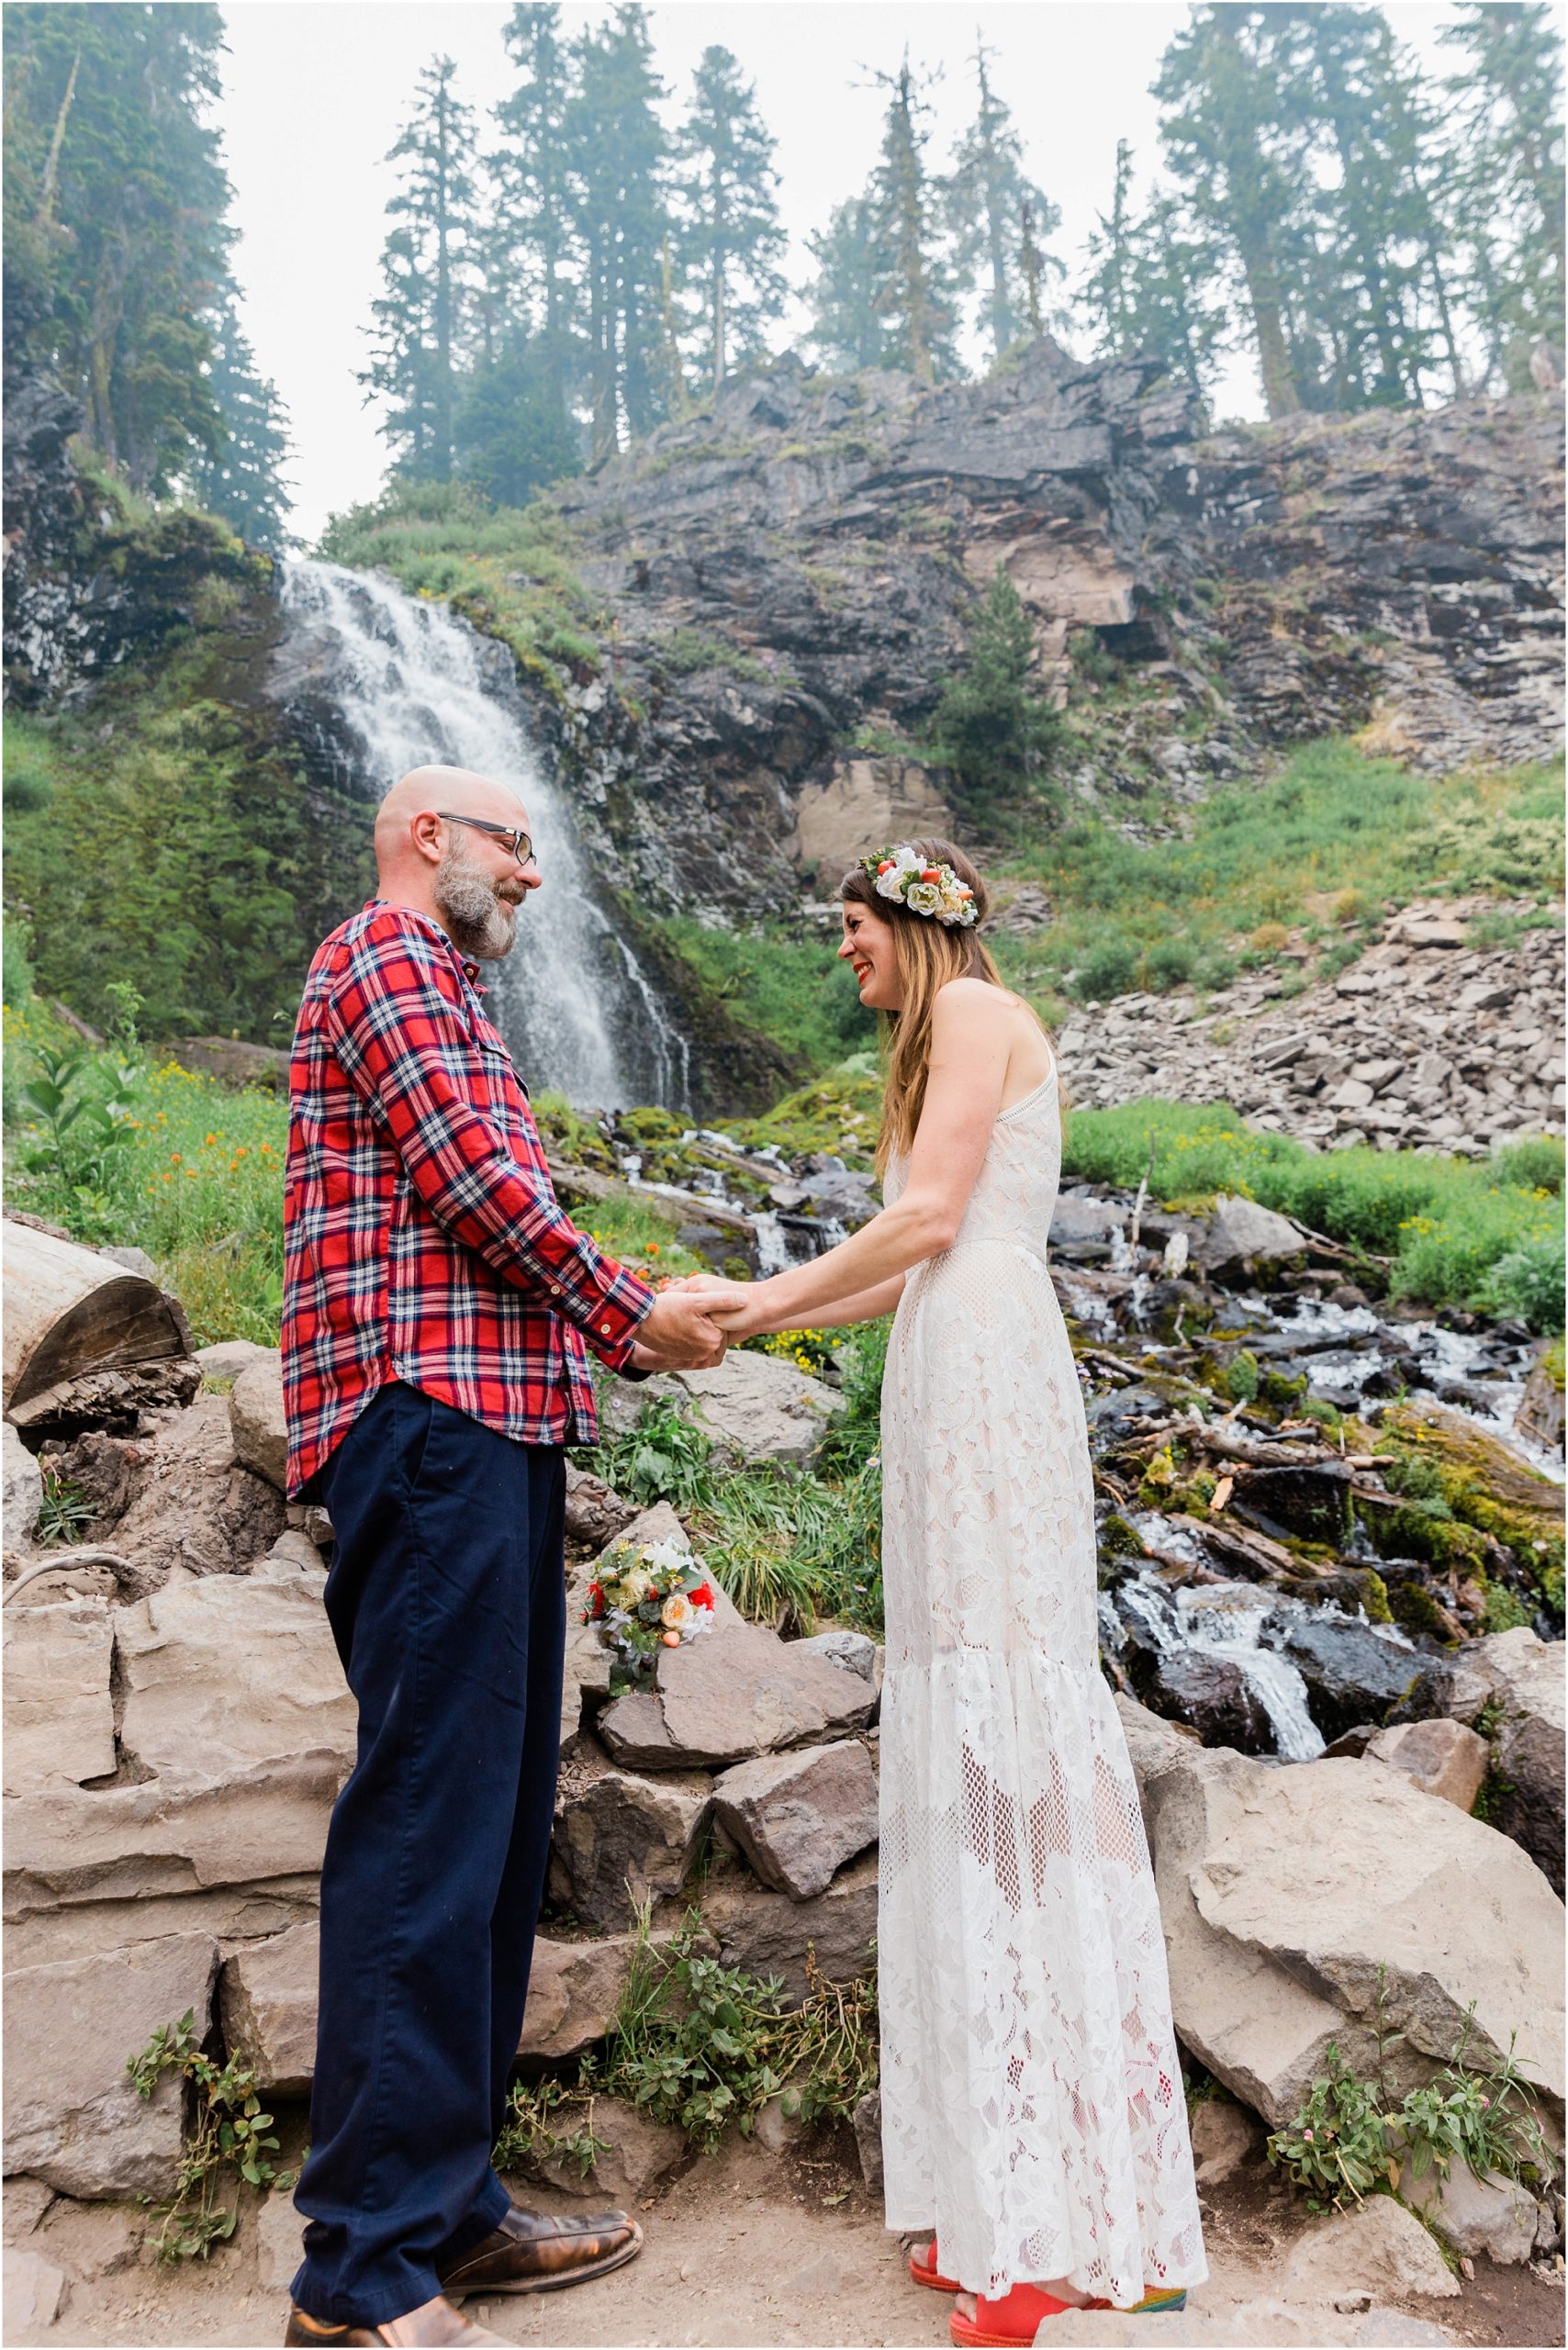 An absolutely breathtaking Crater Lake elopement at Plaikni Falls in Oregon. | Erica Swantek Photography